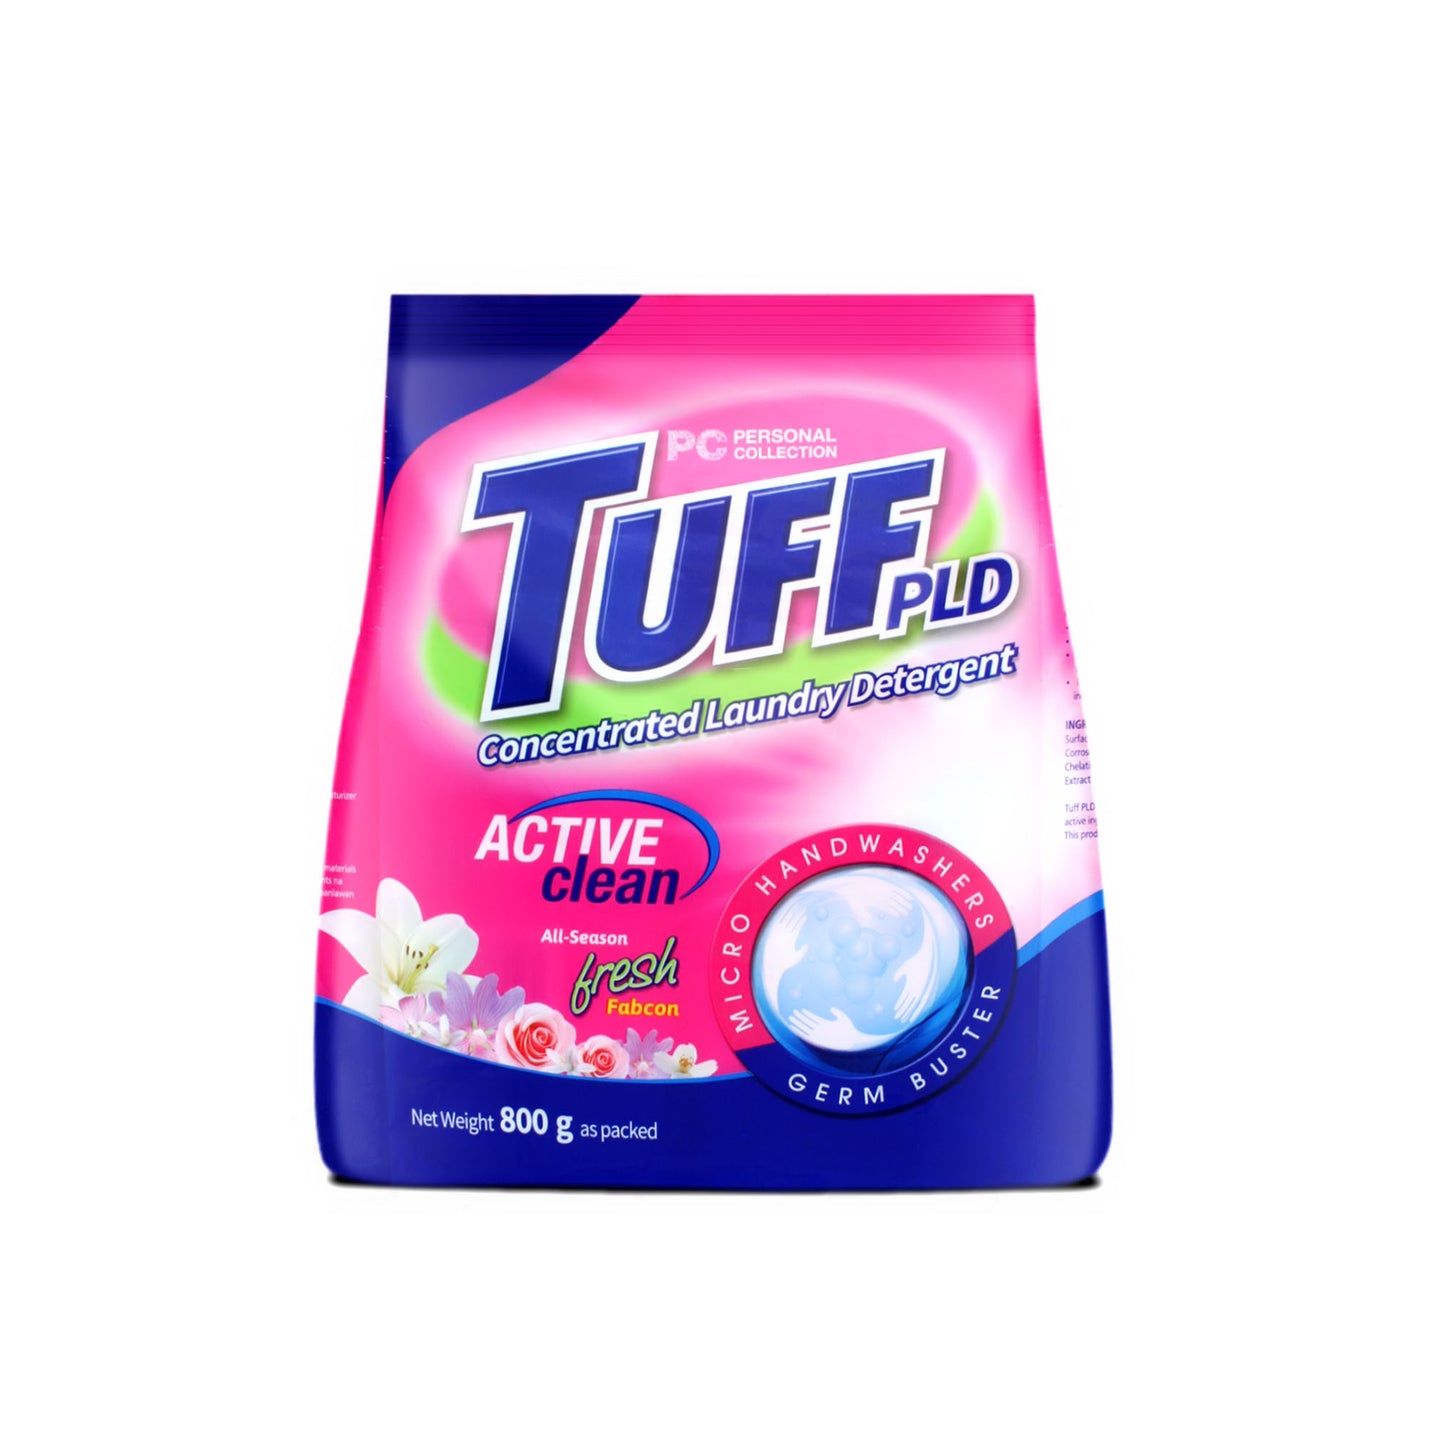 Tuff PLD Active Clean 800 g Concentrated Powder Detergent